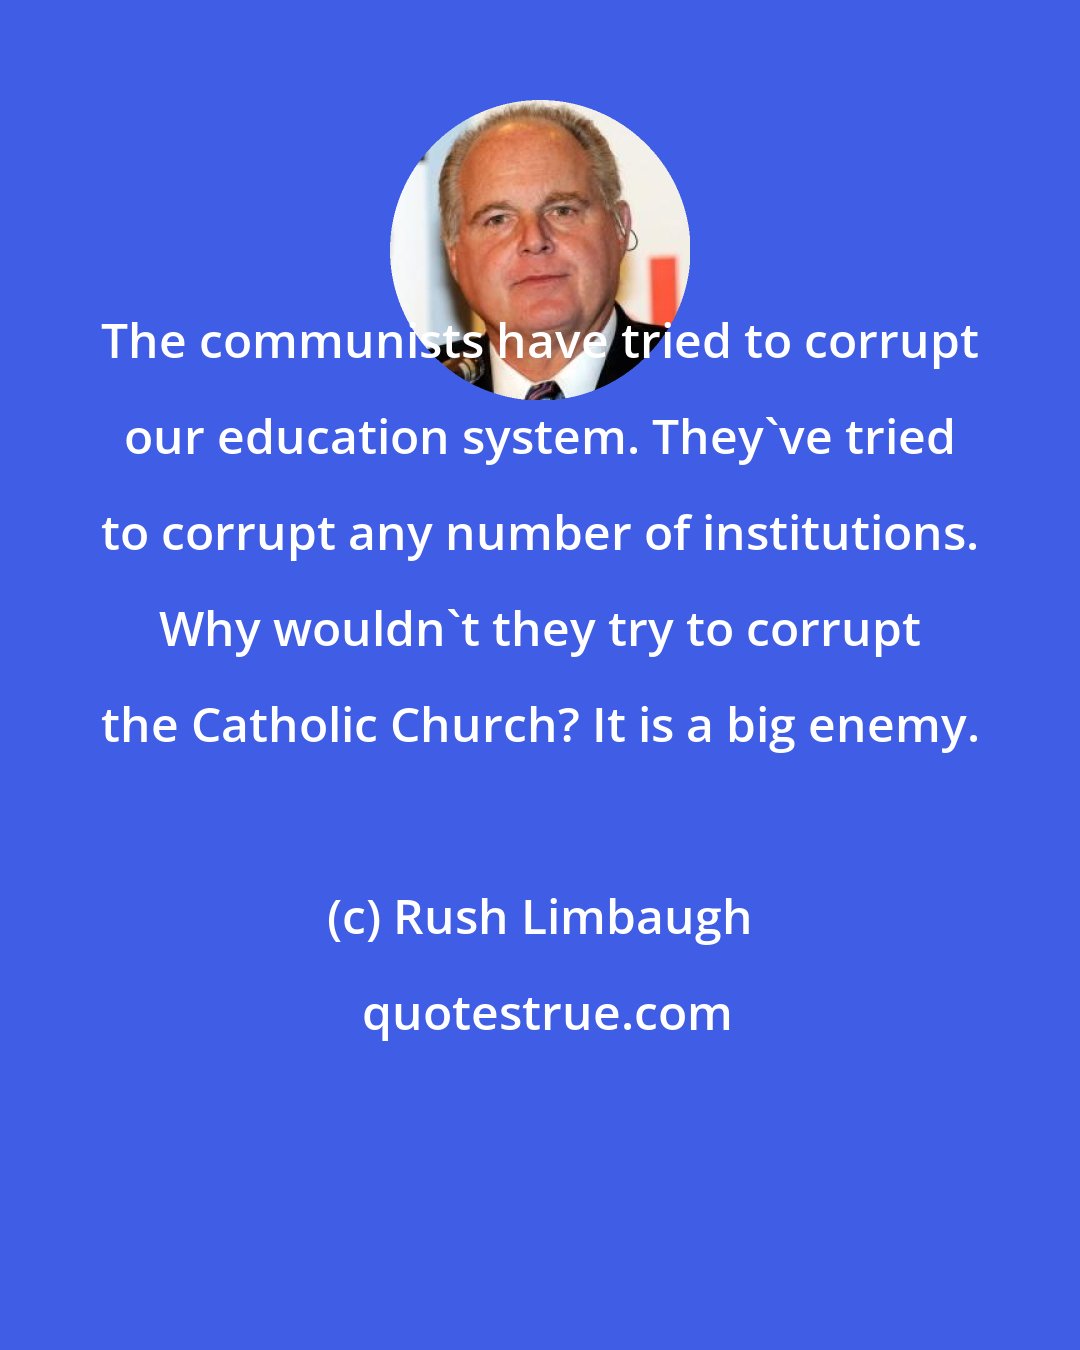 Rush Limbaugh: The communists have tried to corrupt our education system. They've tried to corrupt any number of institutions. Why wouldn't they try to corrupt the Catholic Church? It is a big enemy.